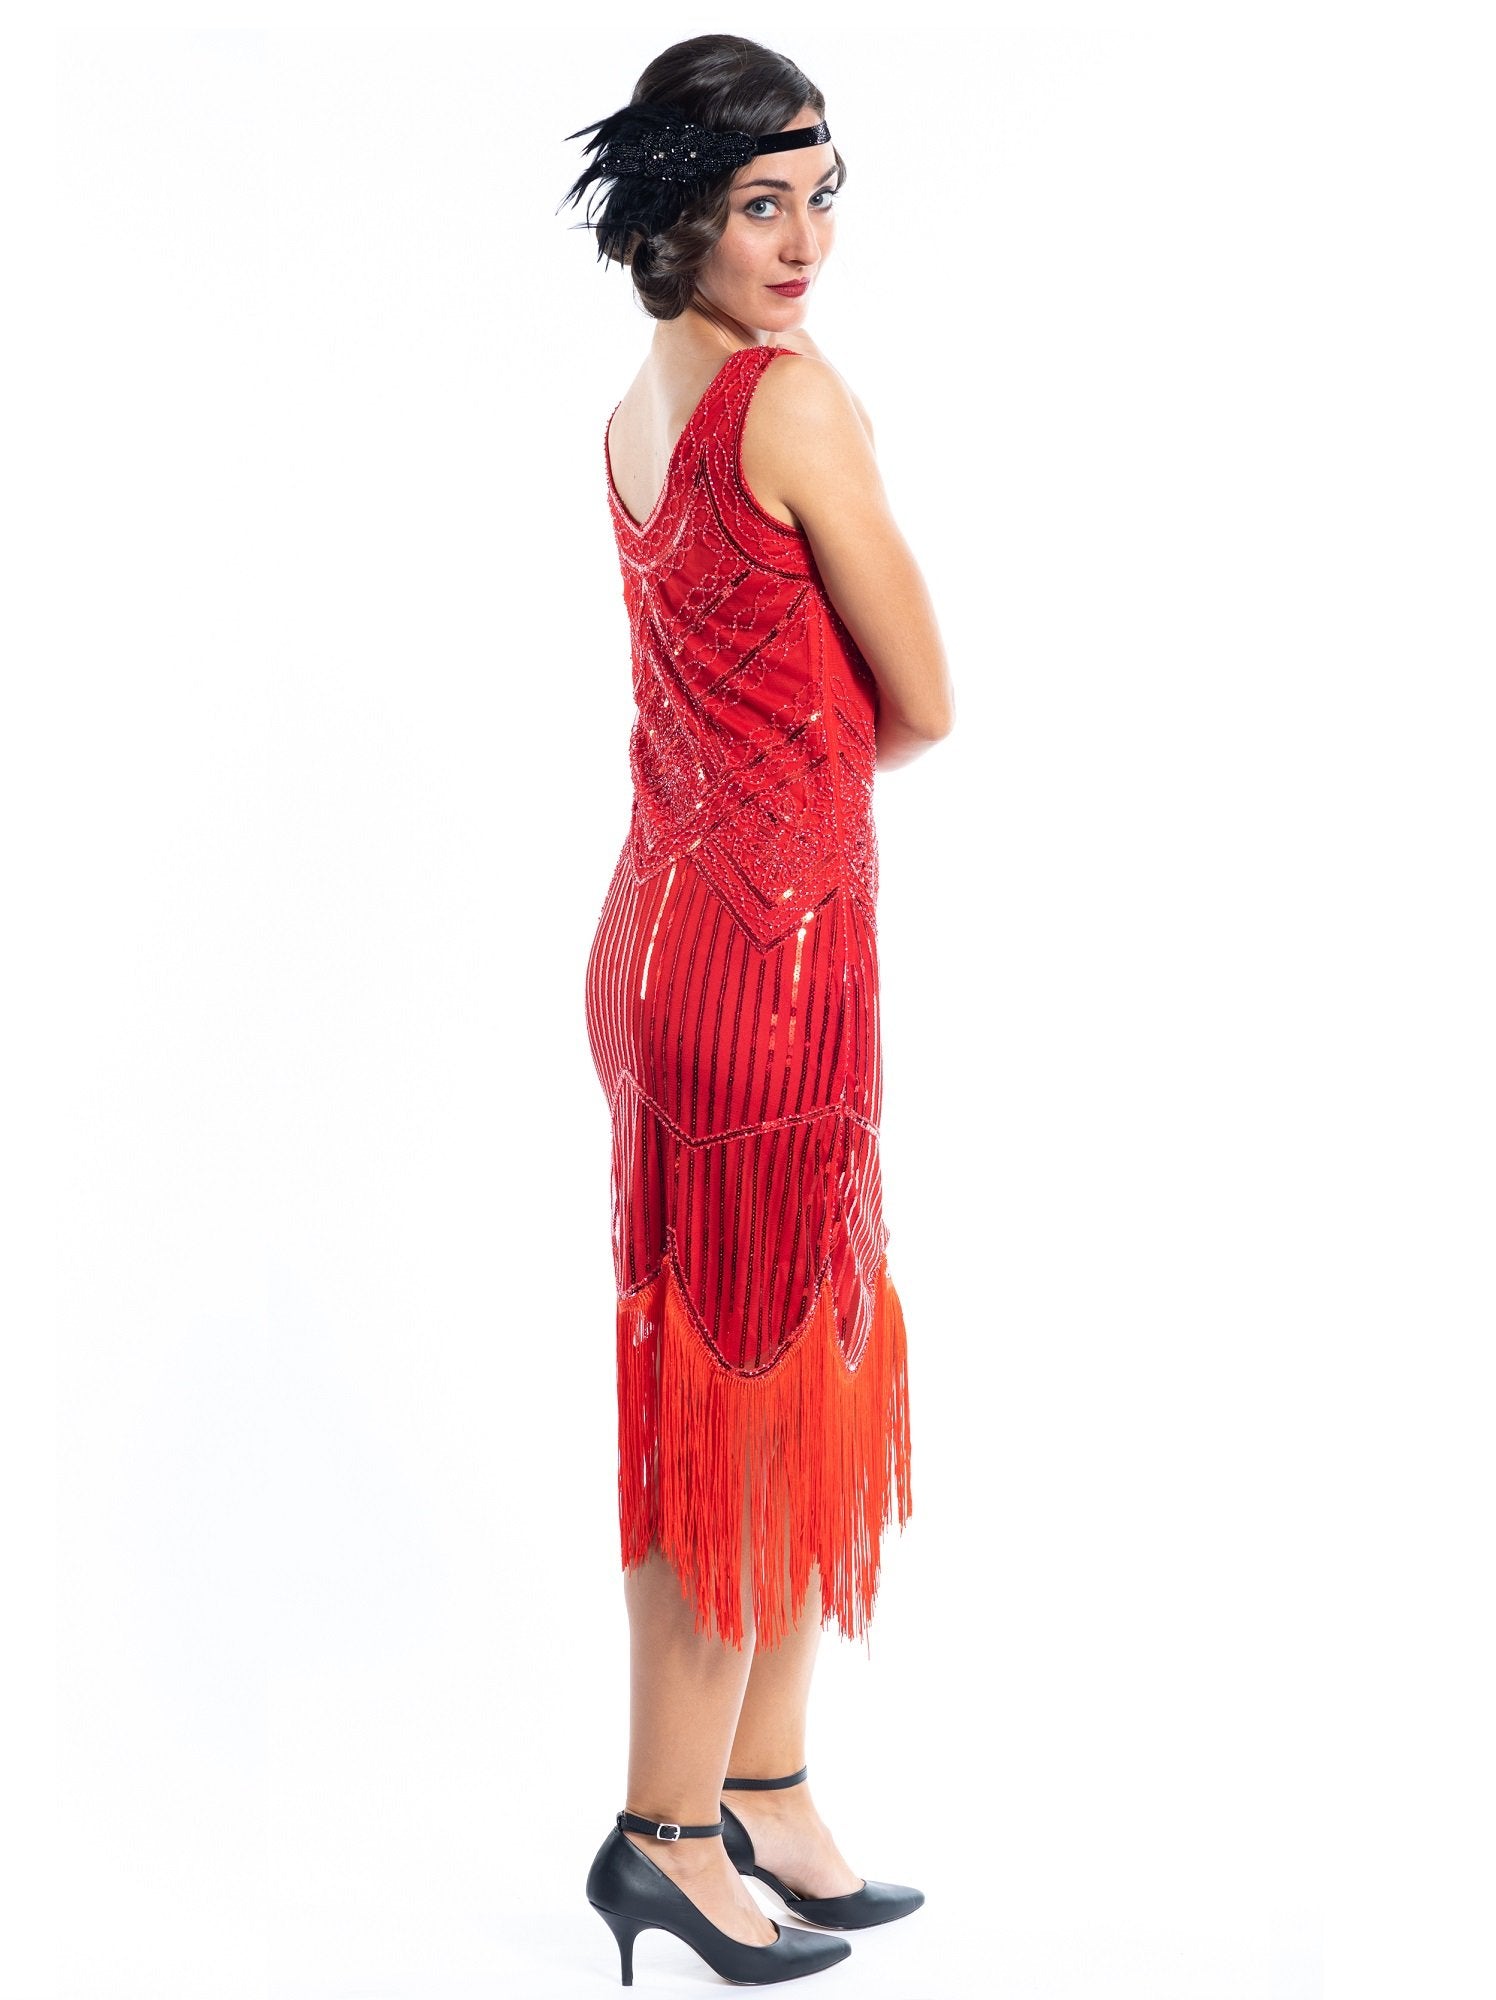 A 1920s Red Flapper Dress with sequins and beads - Back View